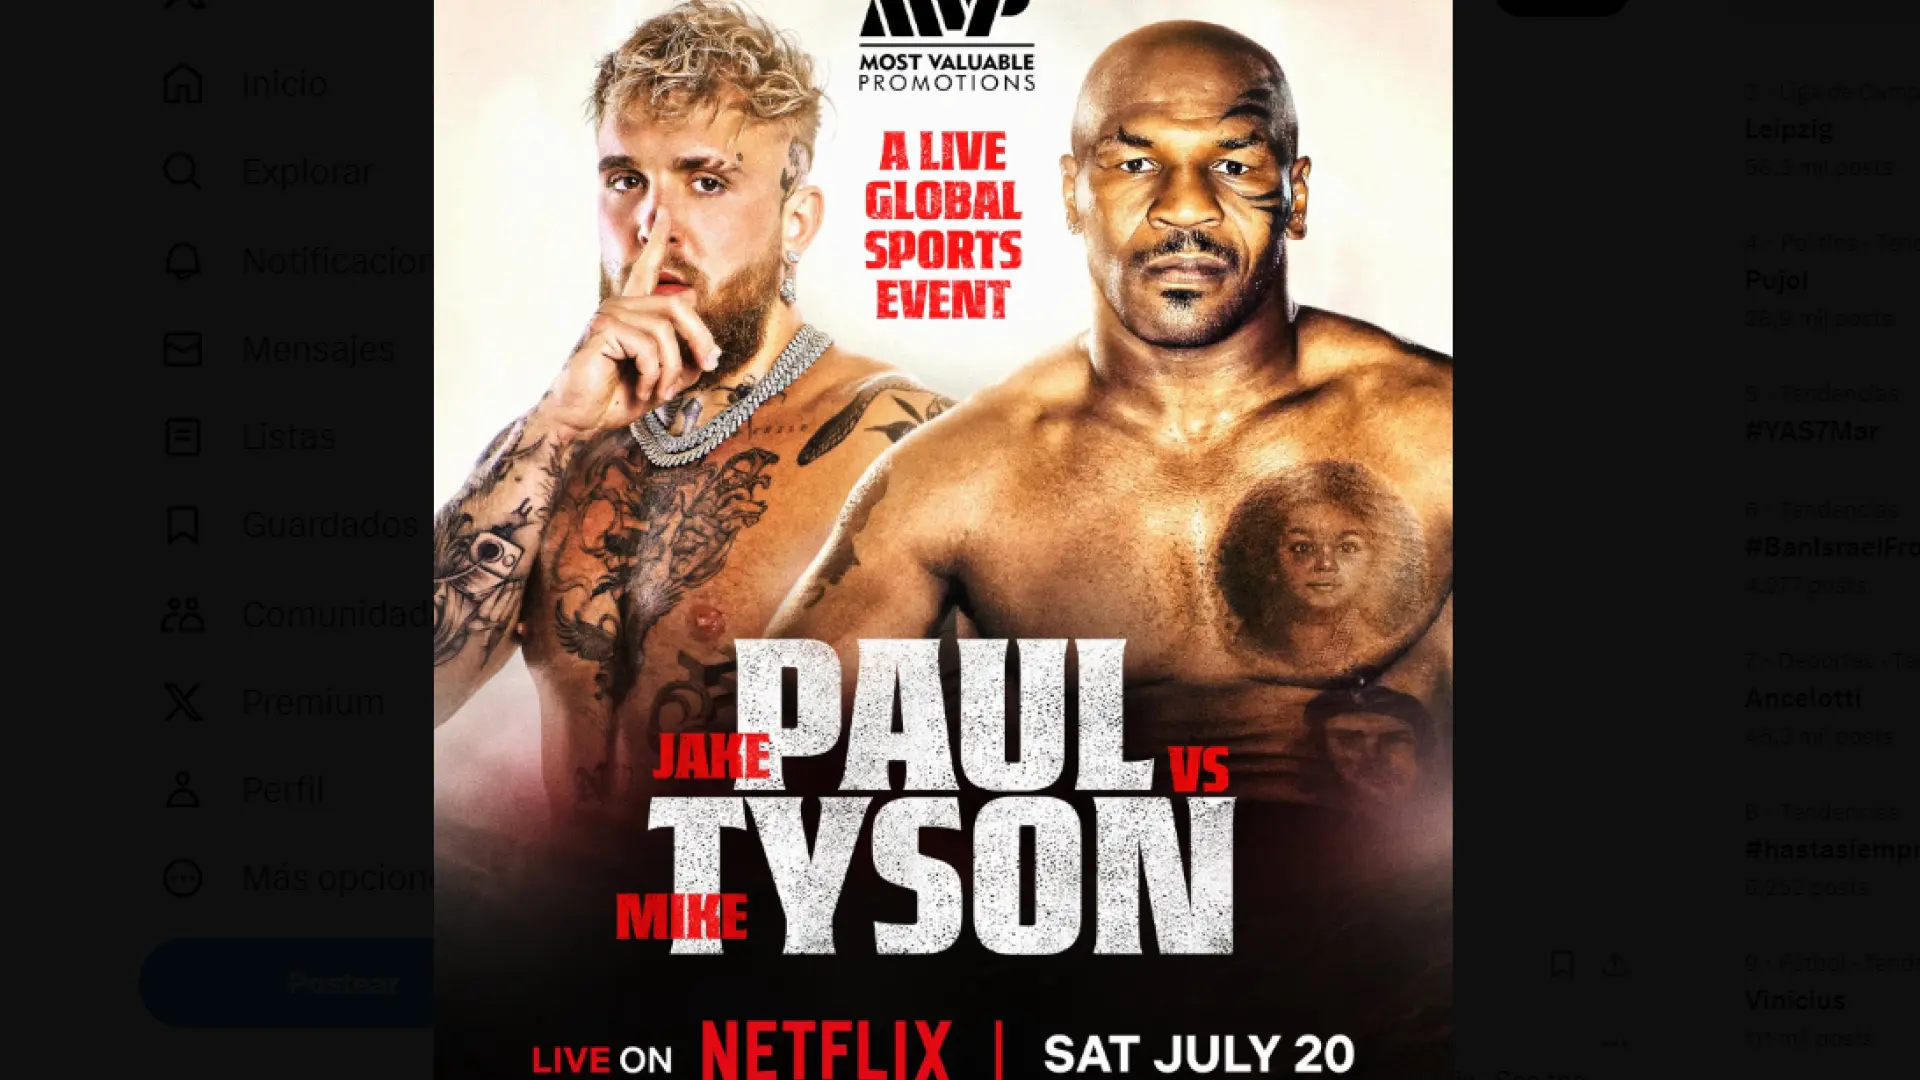 Mike Tyson vs. Jake Paul will return for another Netflix show